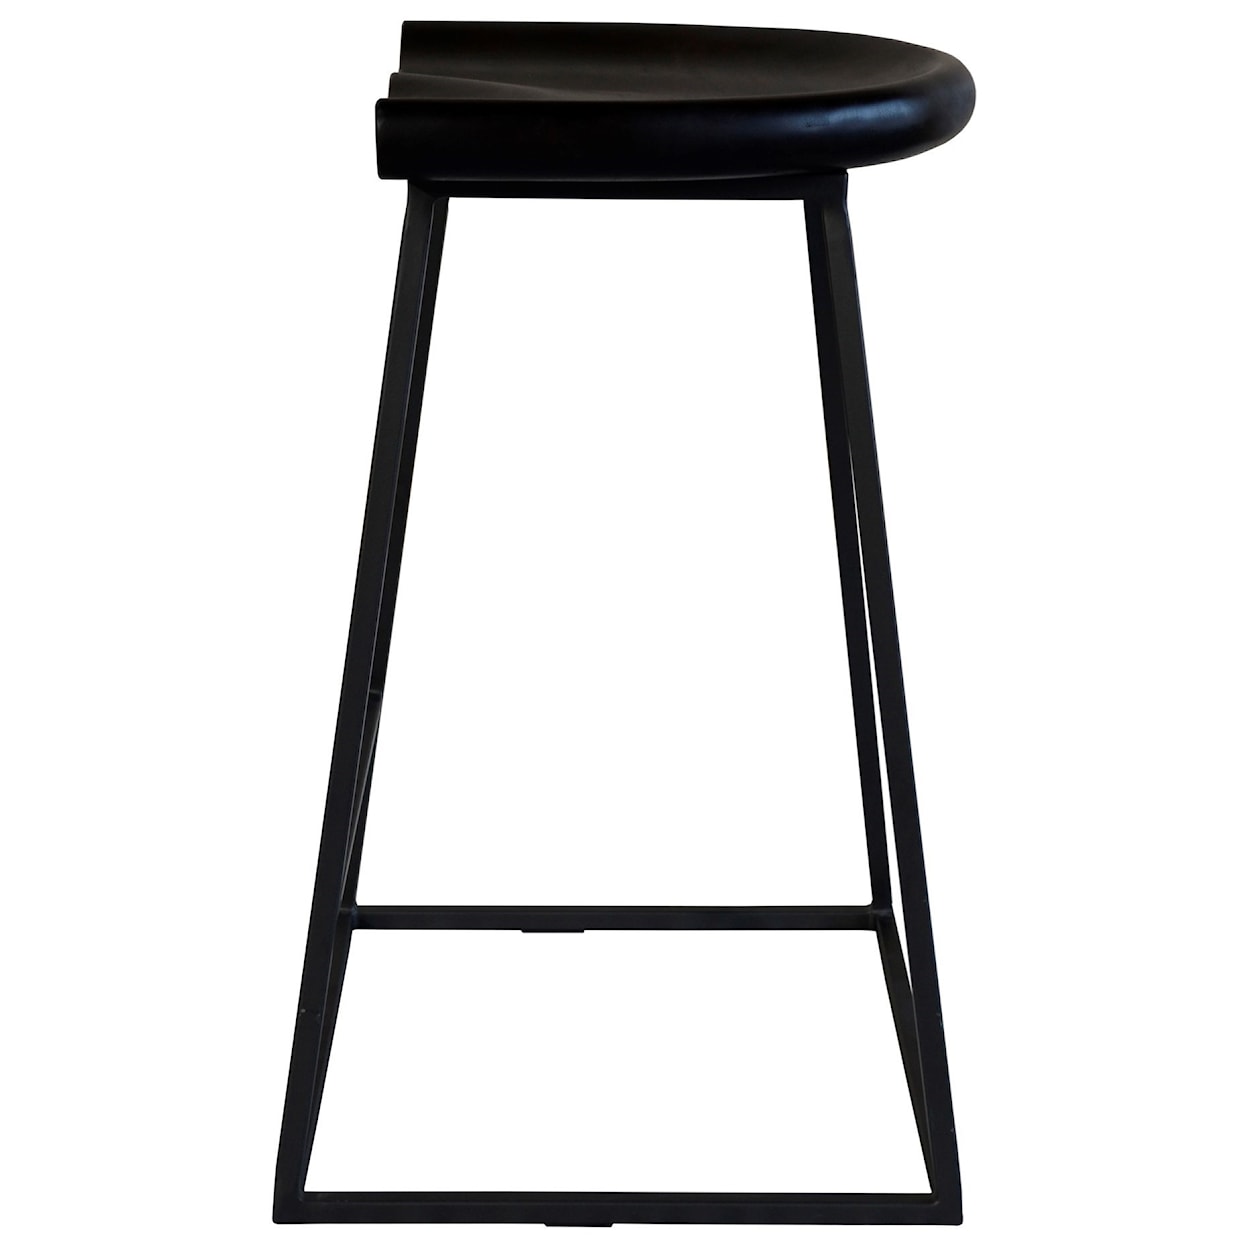 Moe's Home Collection Jackman Counter Height Stool